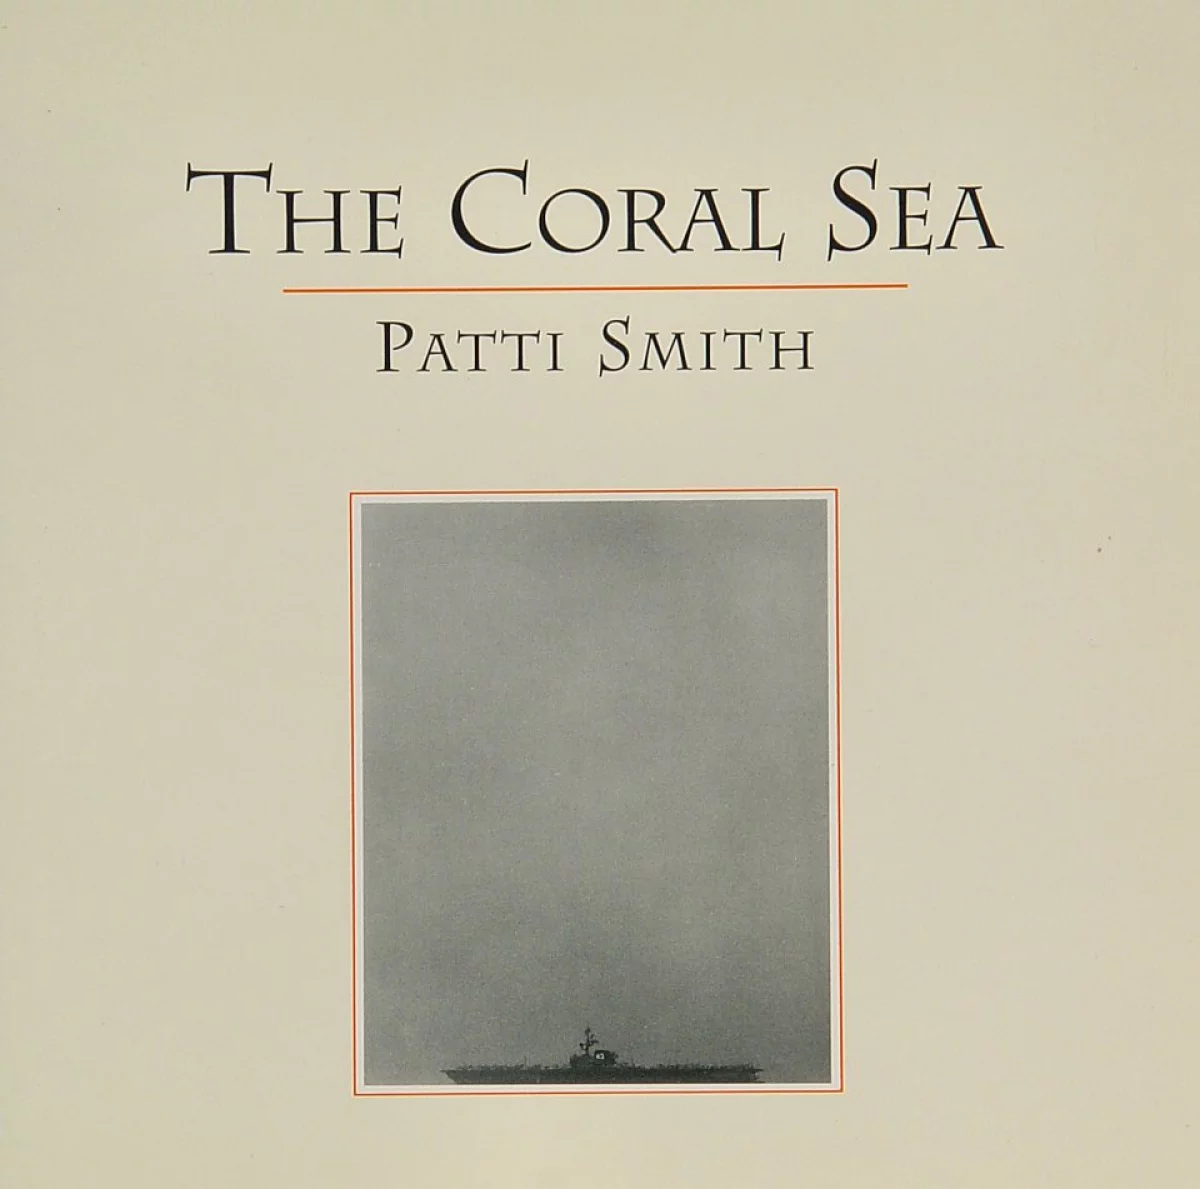 The Coral Sea Book by Patti Smith, 1996 at Wolfgang's